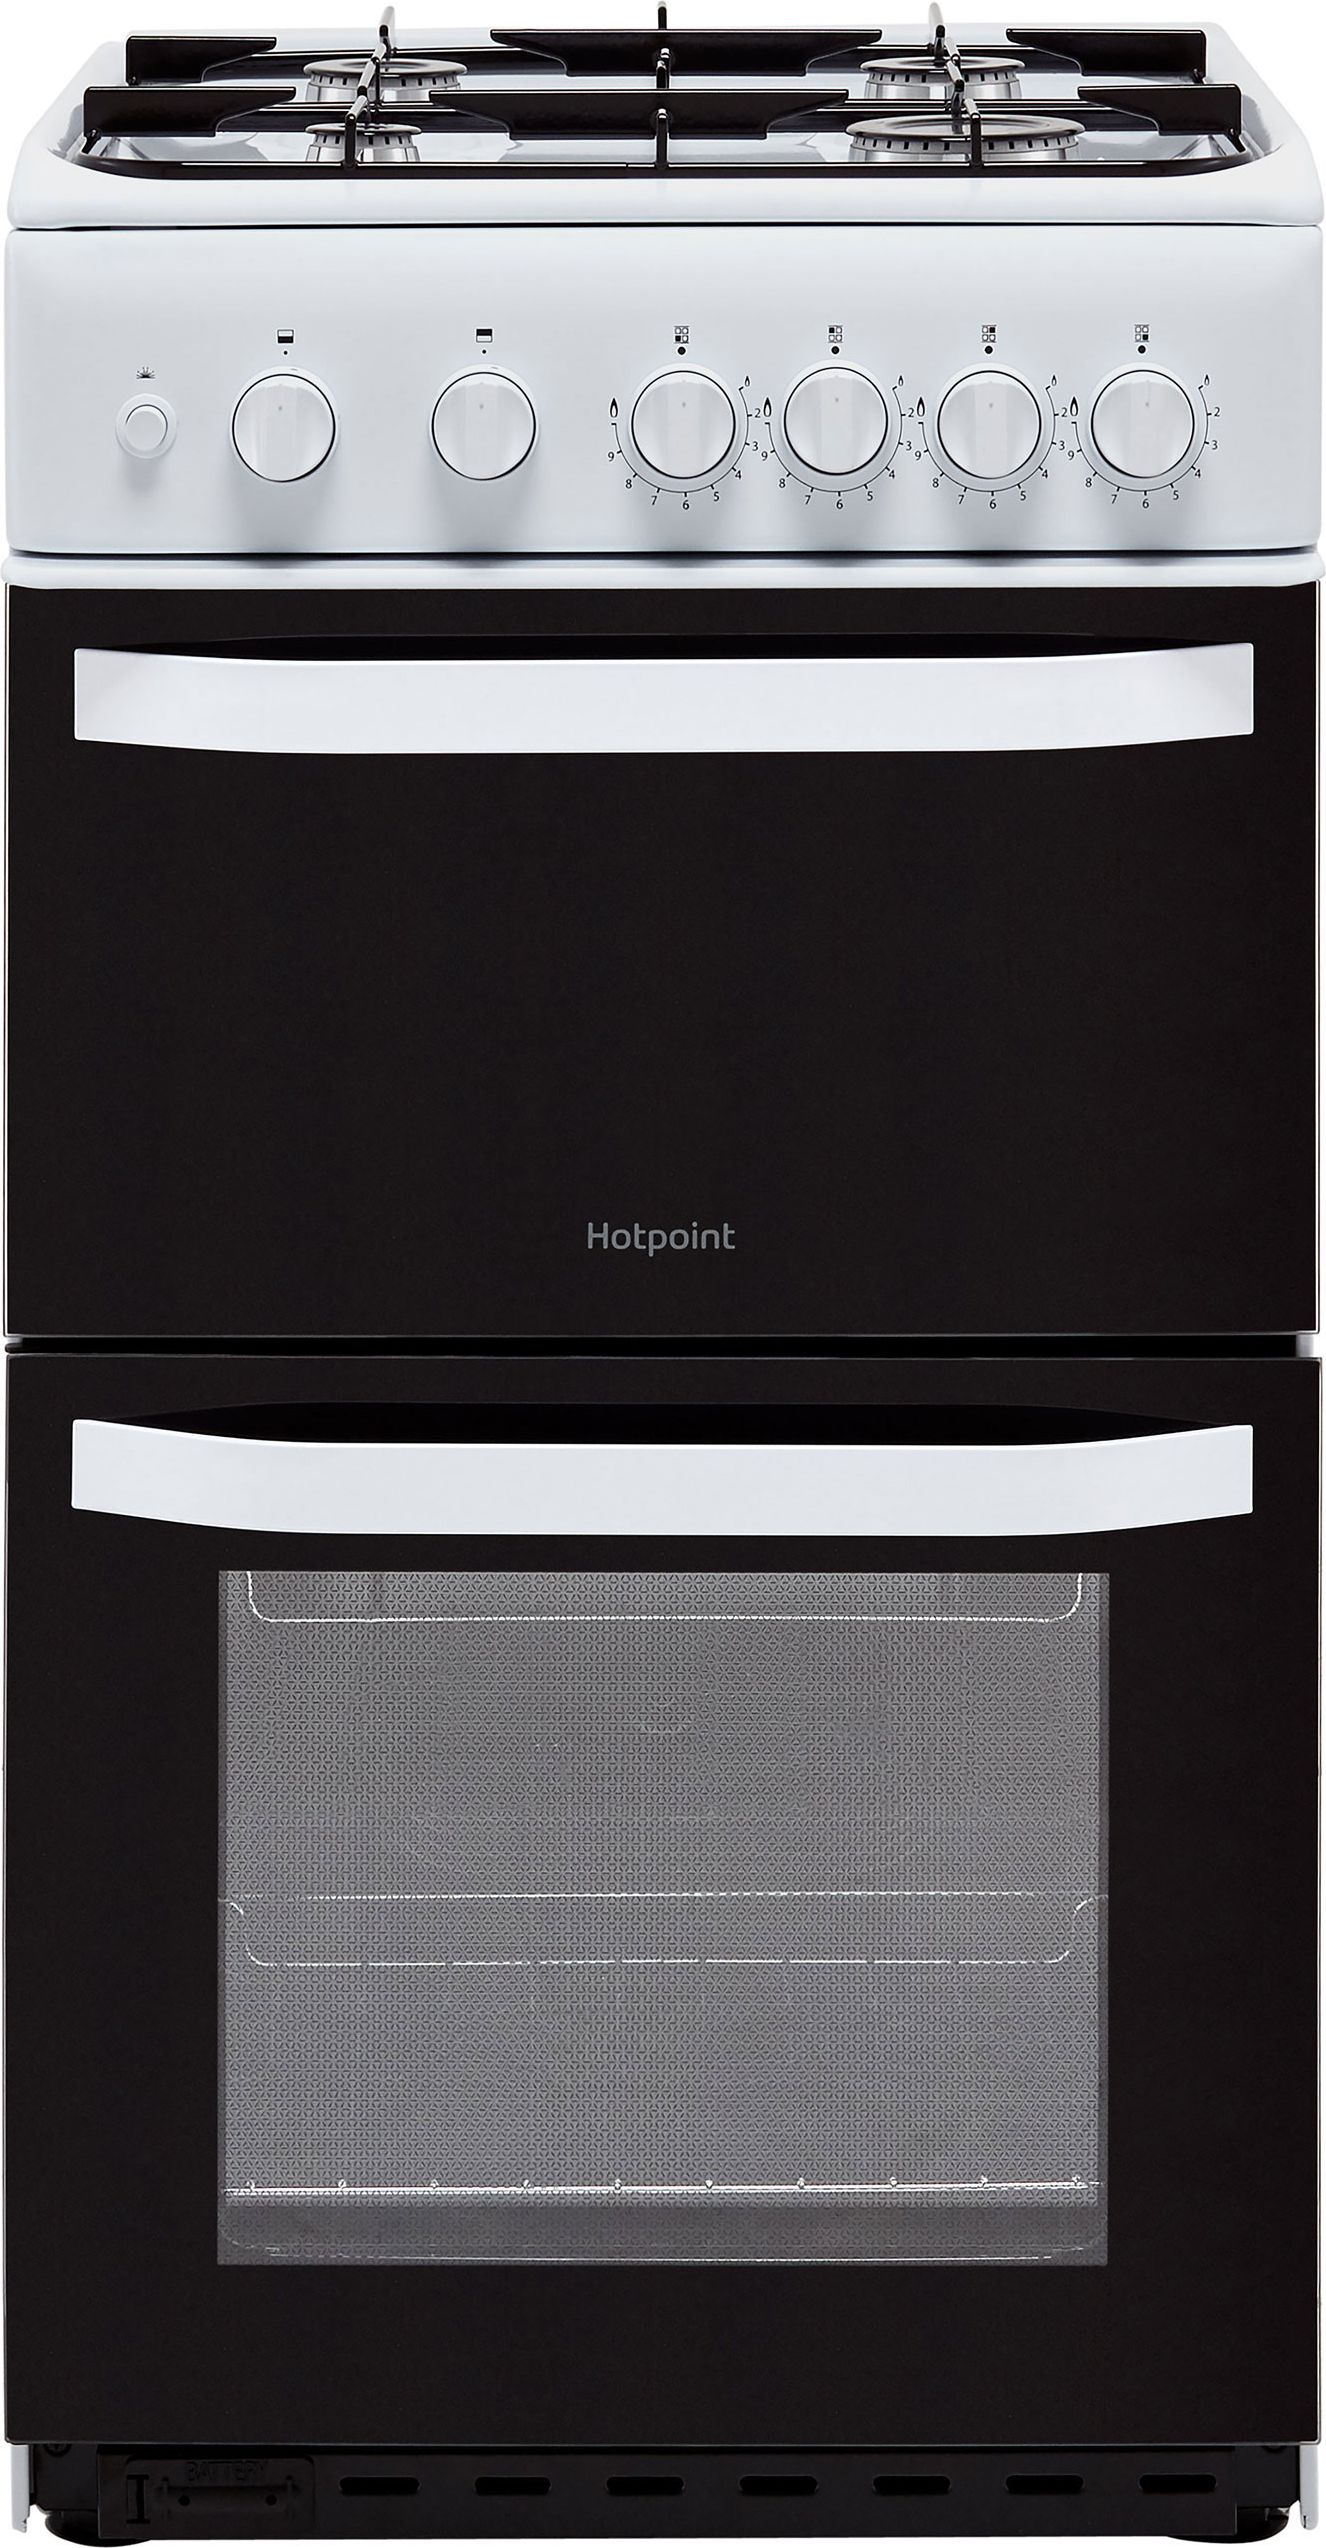 Hotpoint Cloe HD5G00KCW 50cm Freestanding Gas Cooker with Gas Grill - White - A Rated, White